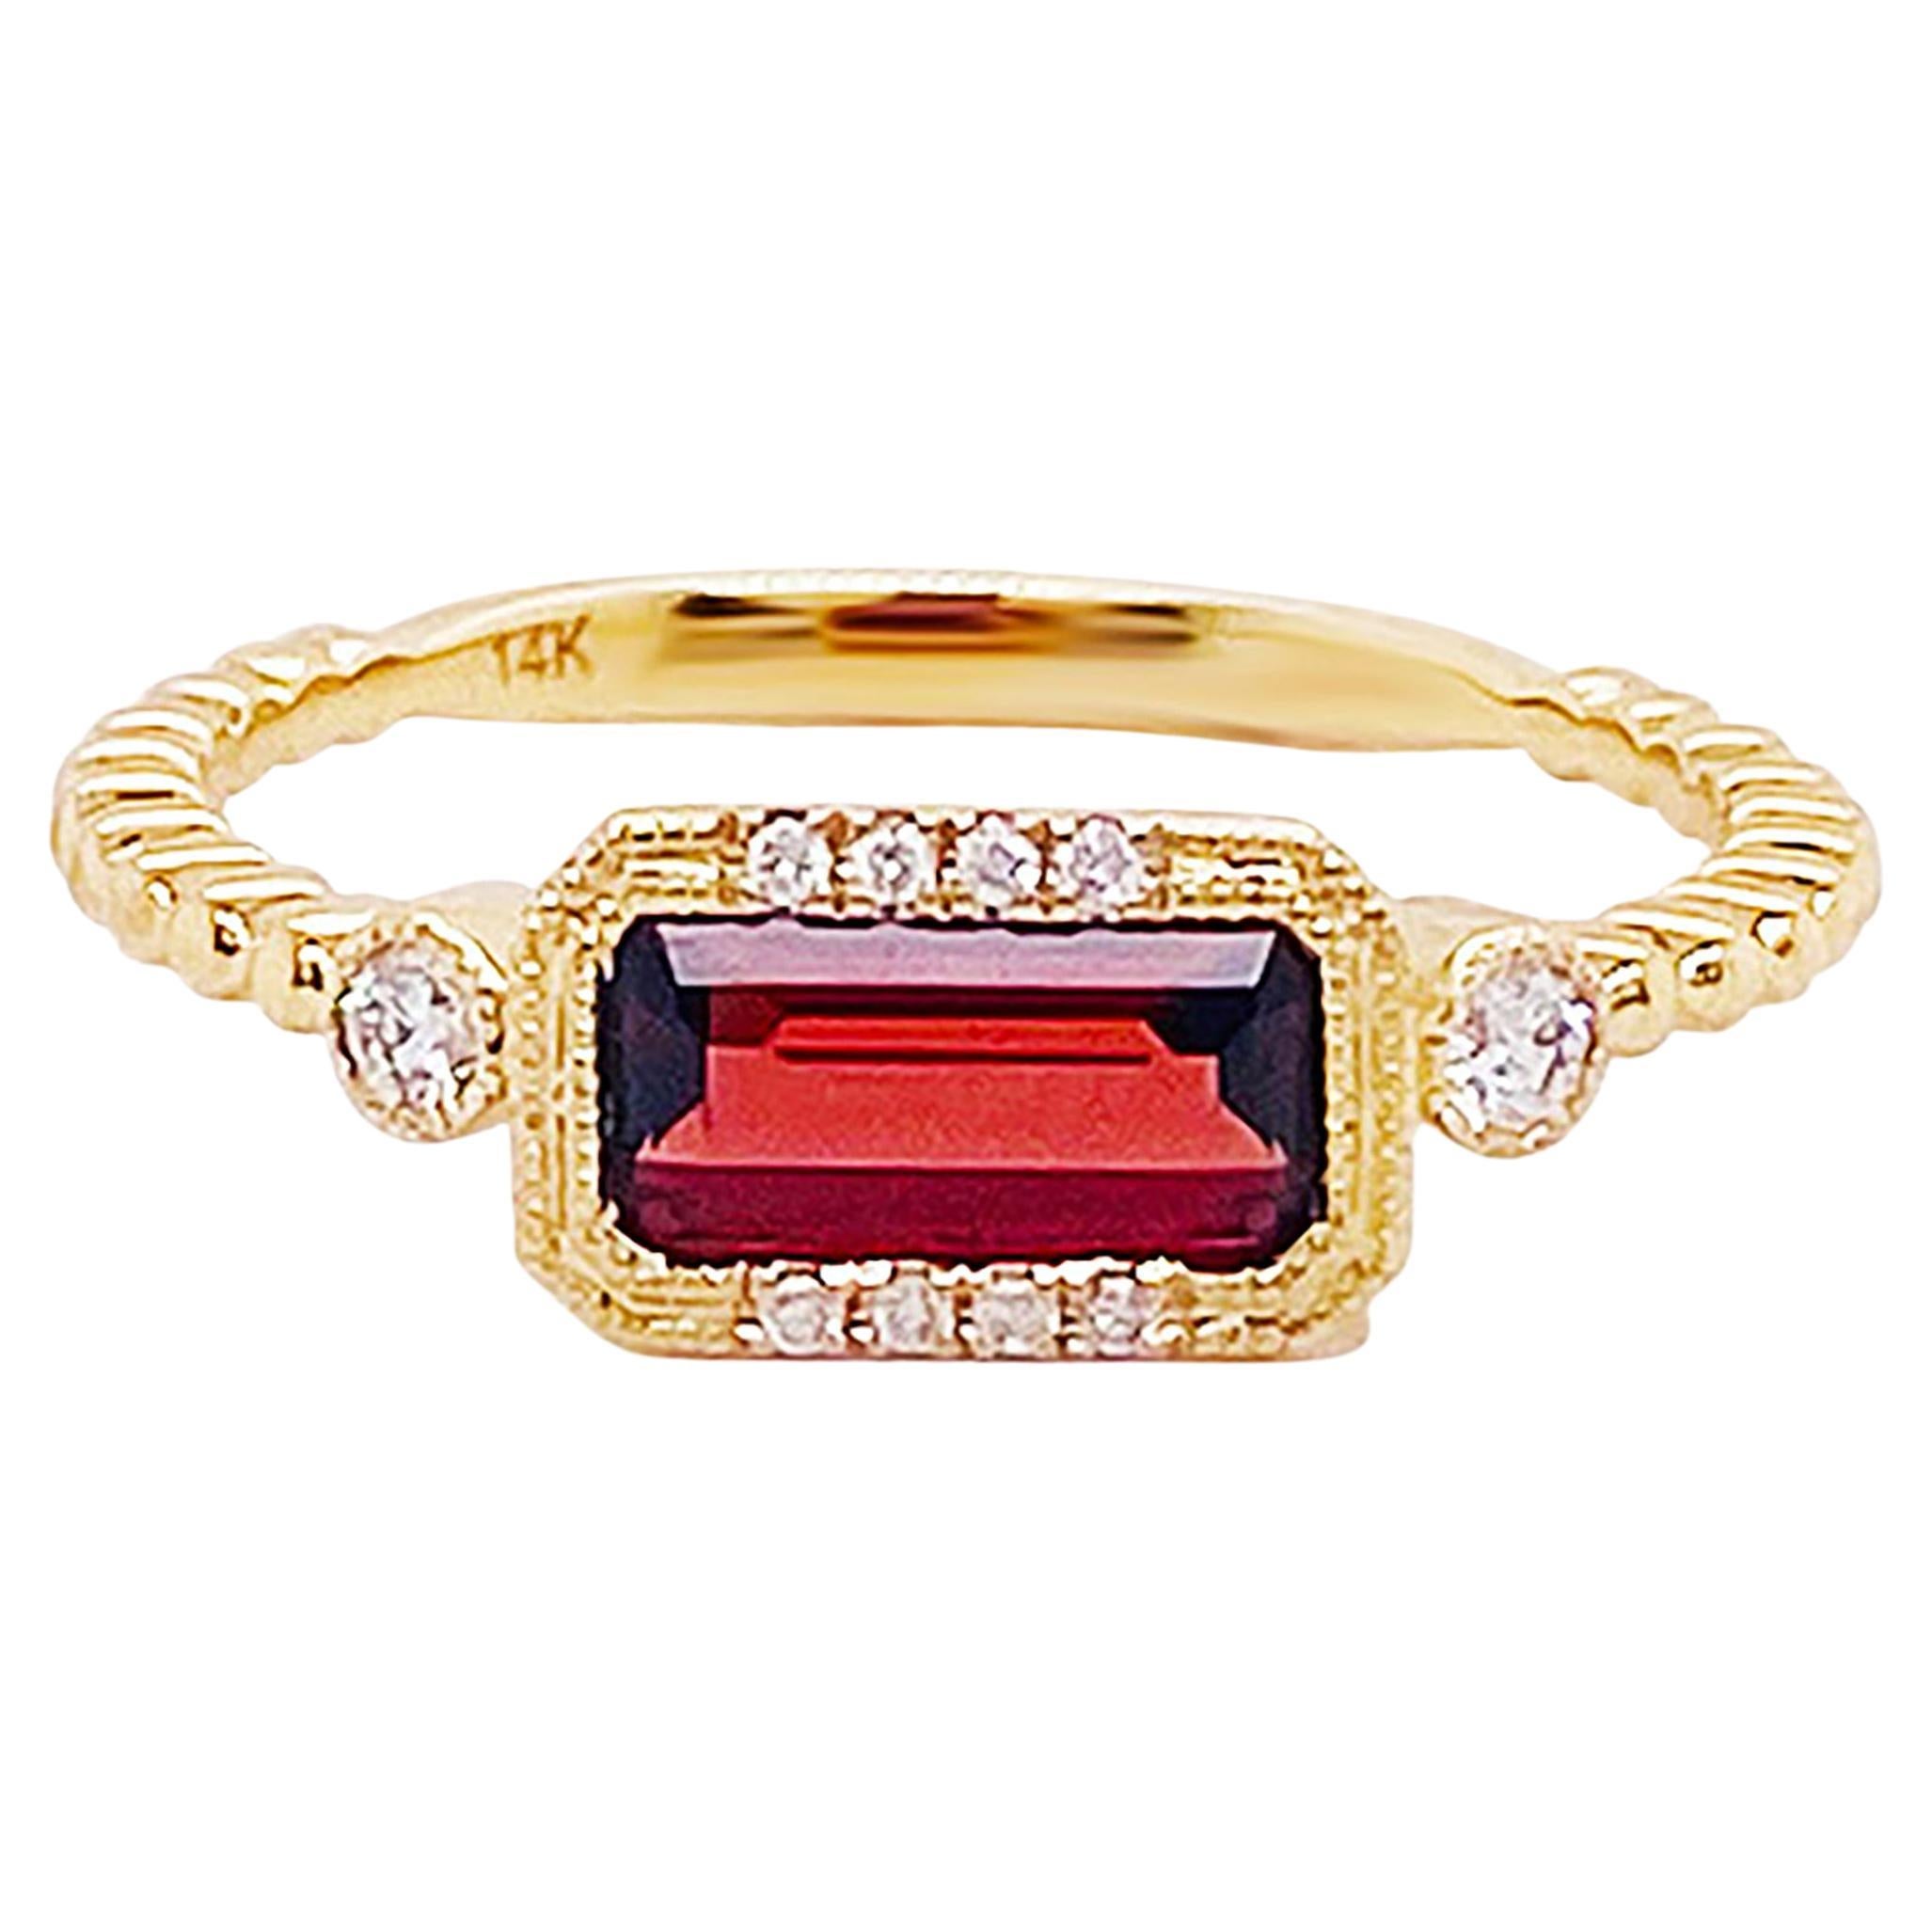 Garnet Diamond Ring January East to West 14K Gold Yellow Gold